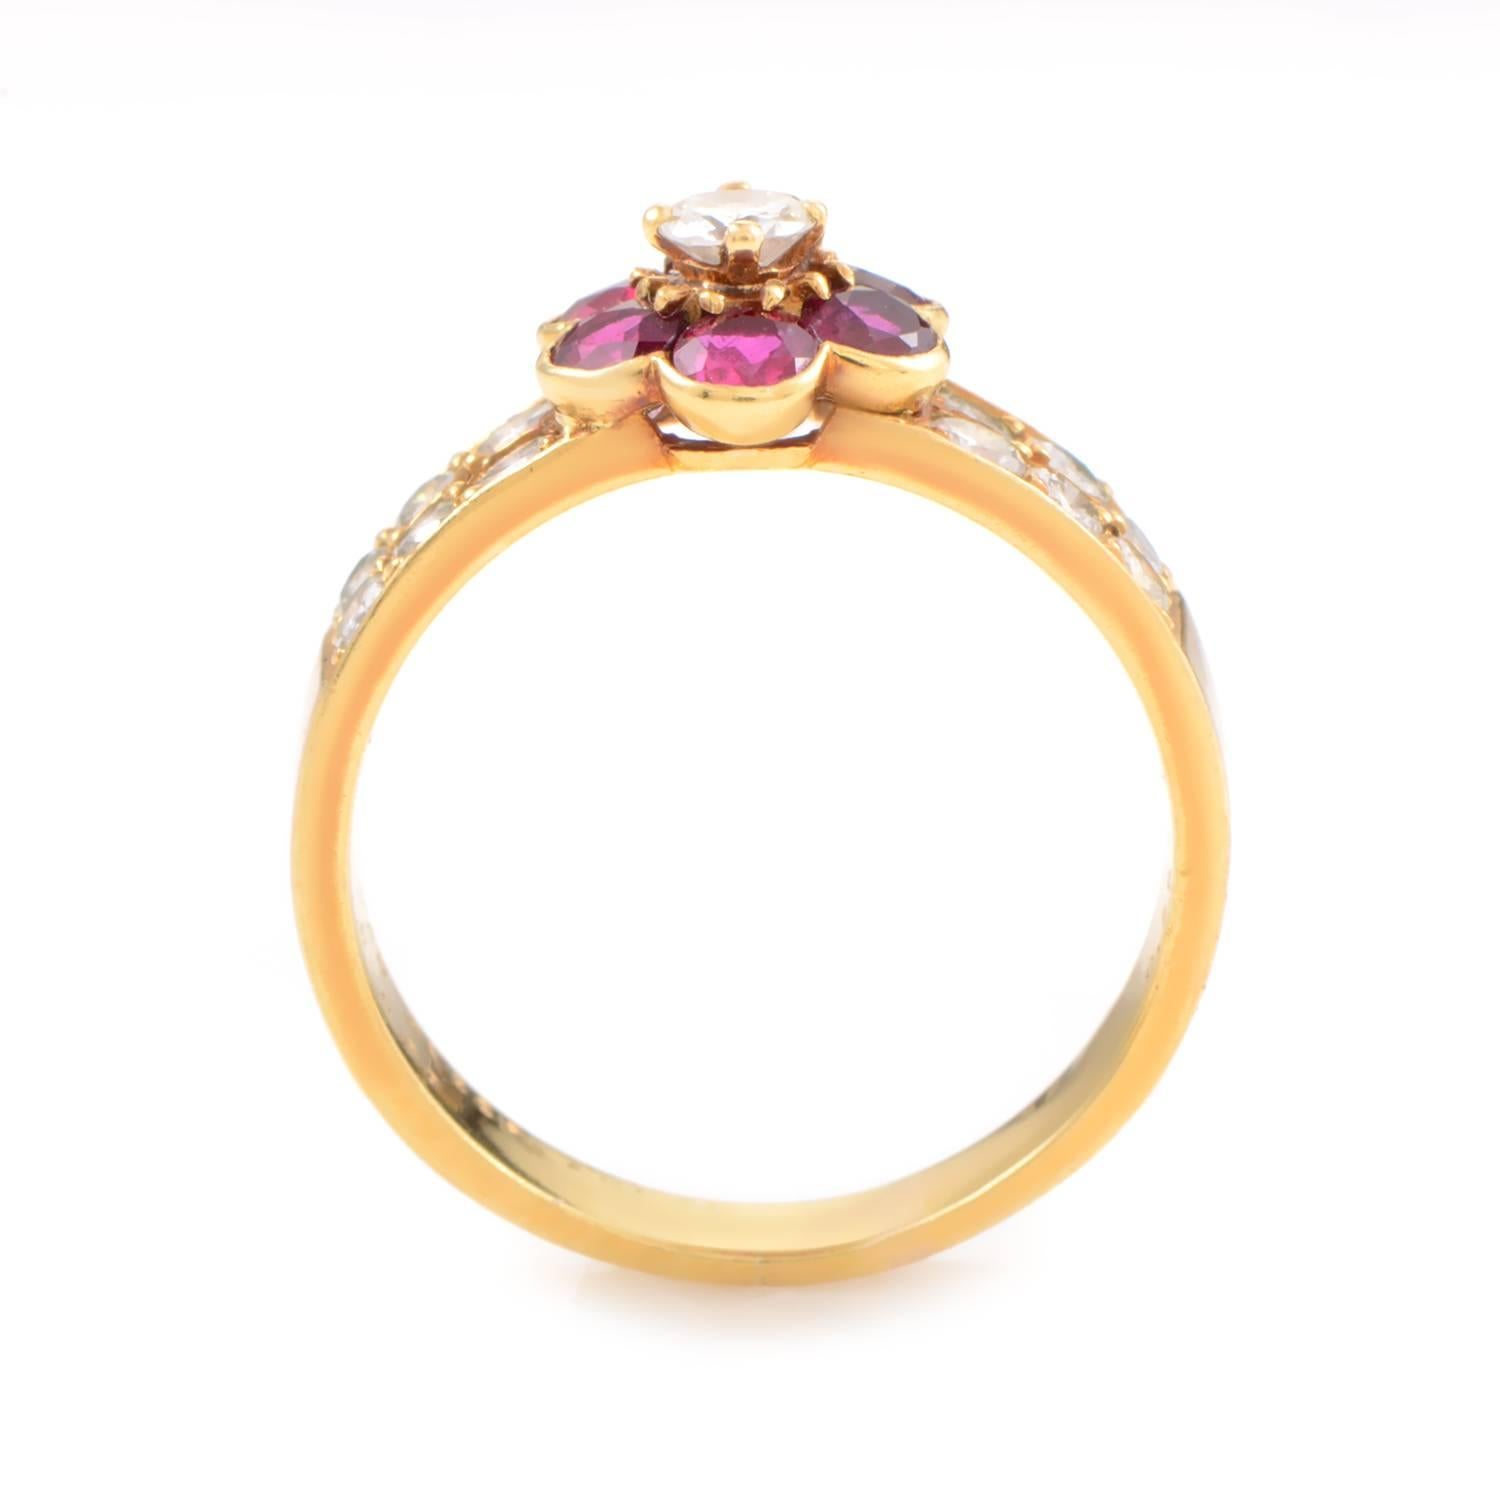 Van Cleef & Arpels is renowned for their famous designs that feature delicate floral motifs. This ring from the brand is made of 18K yellow gold and features shanks set with two rows of diamonds. Perched atop the ring is an adorable flower with